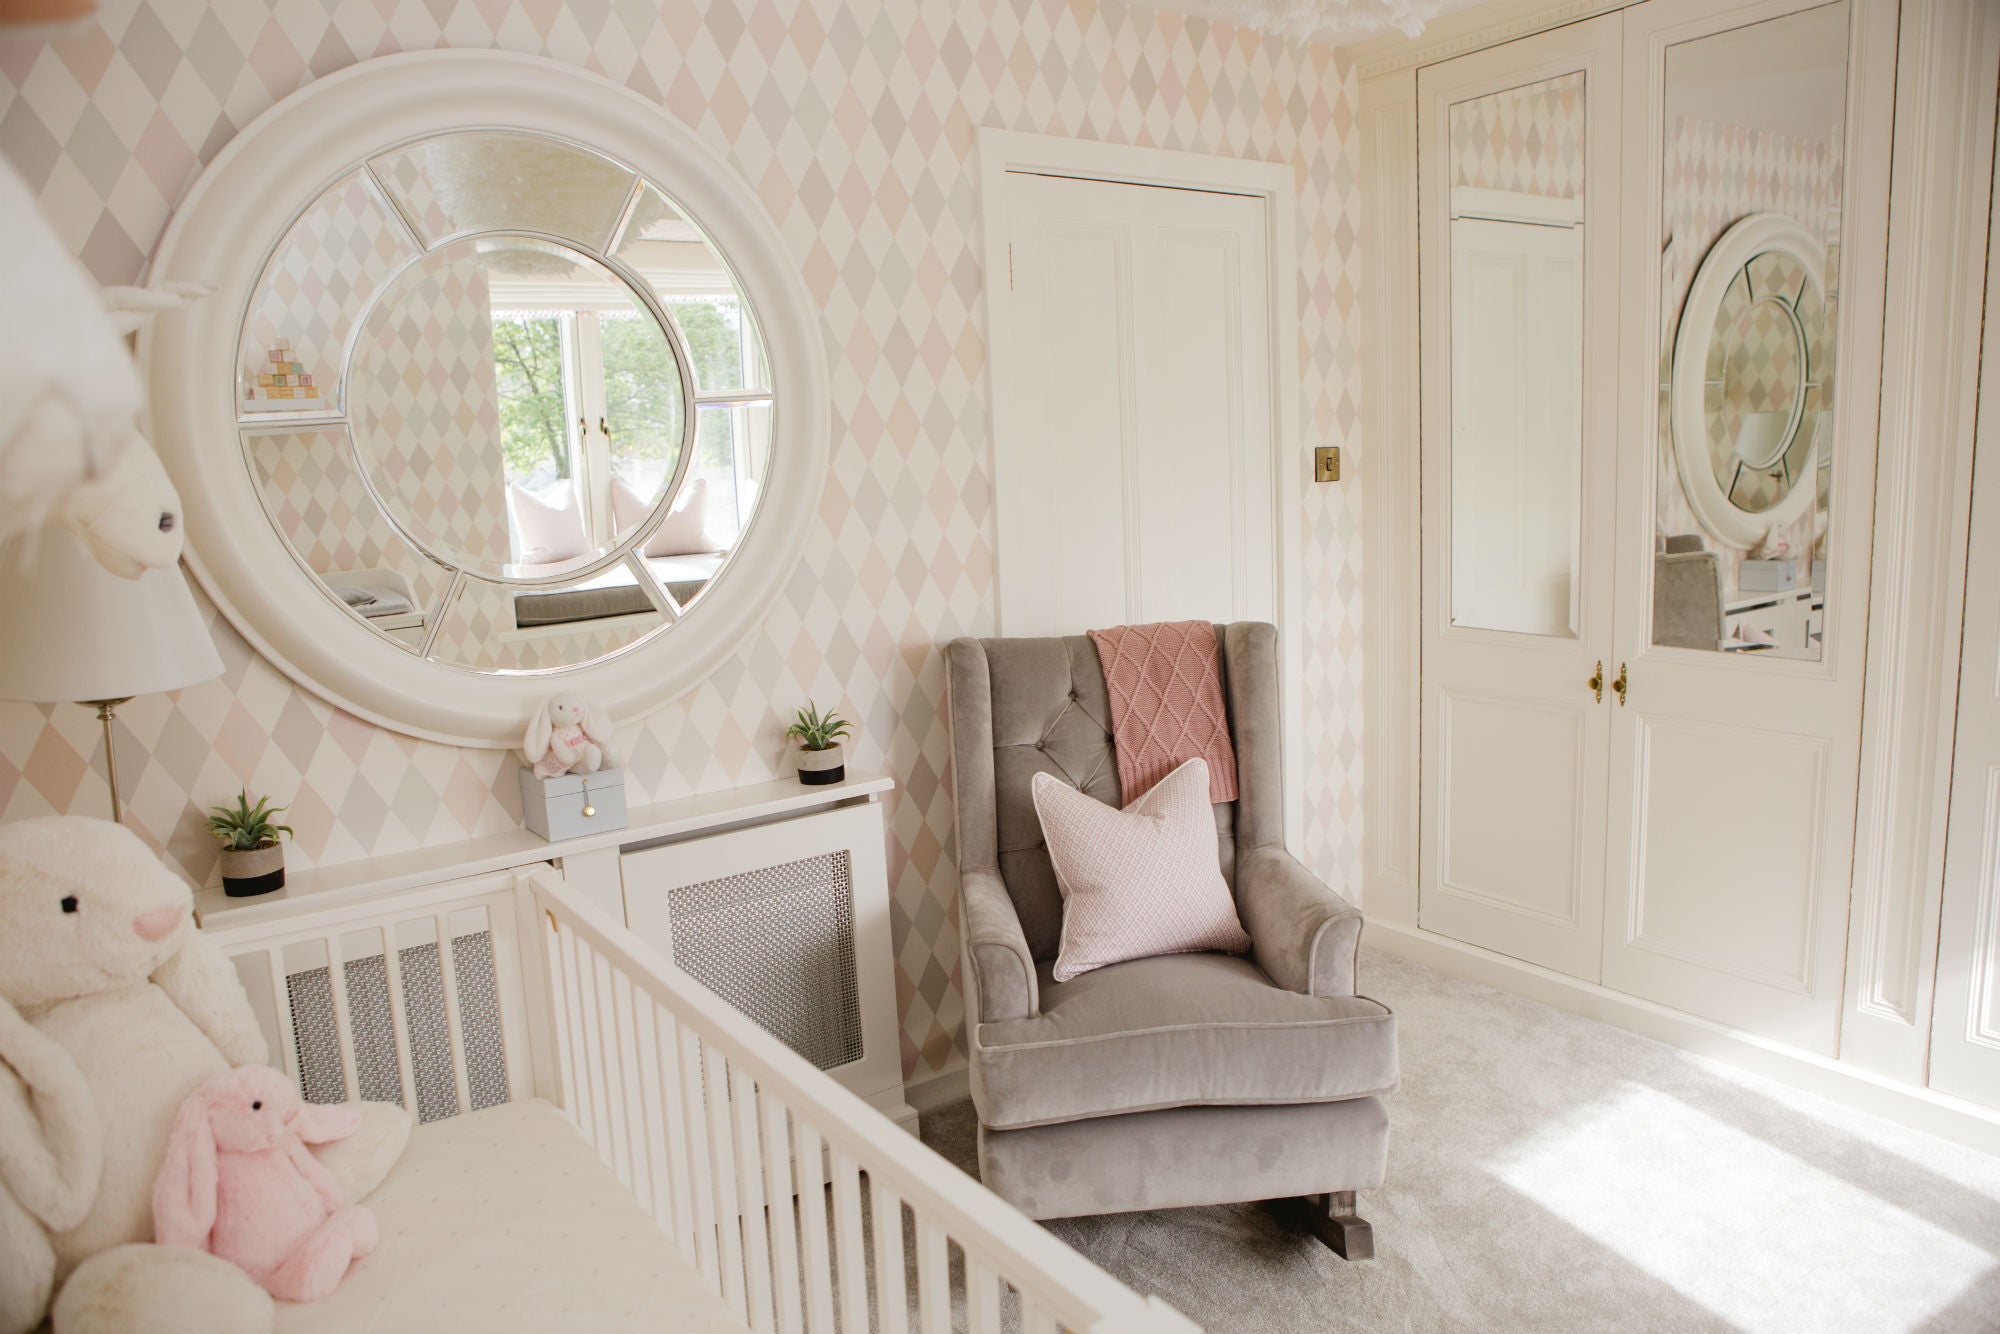 Guest blog by Baby Ventura - Tips for planning you dream nursery